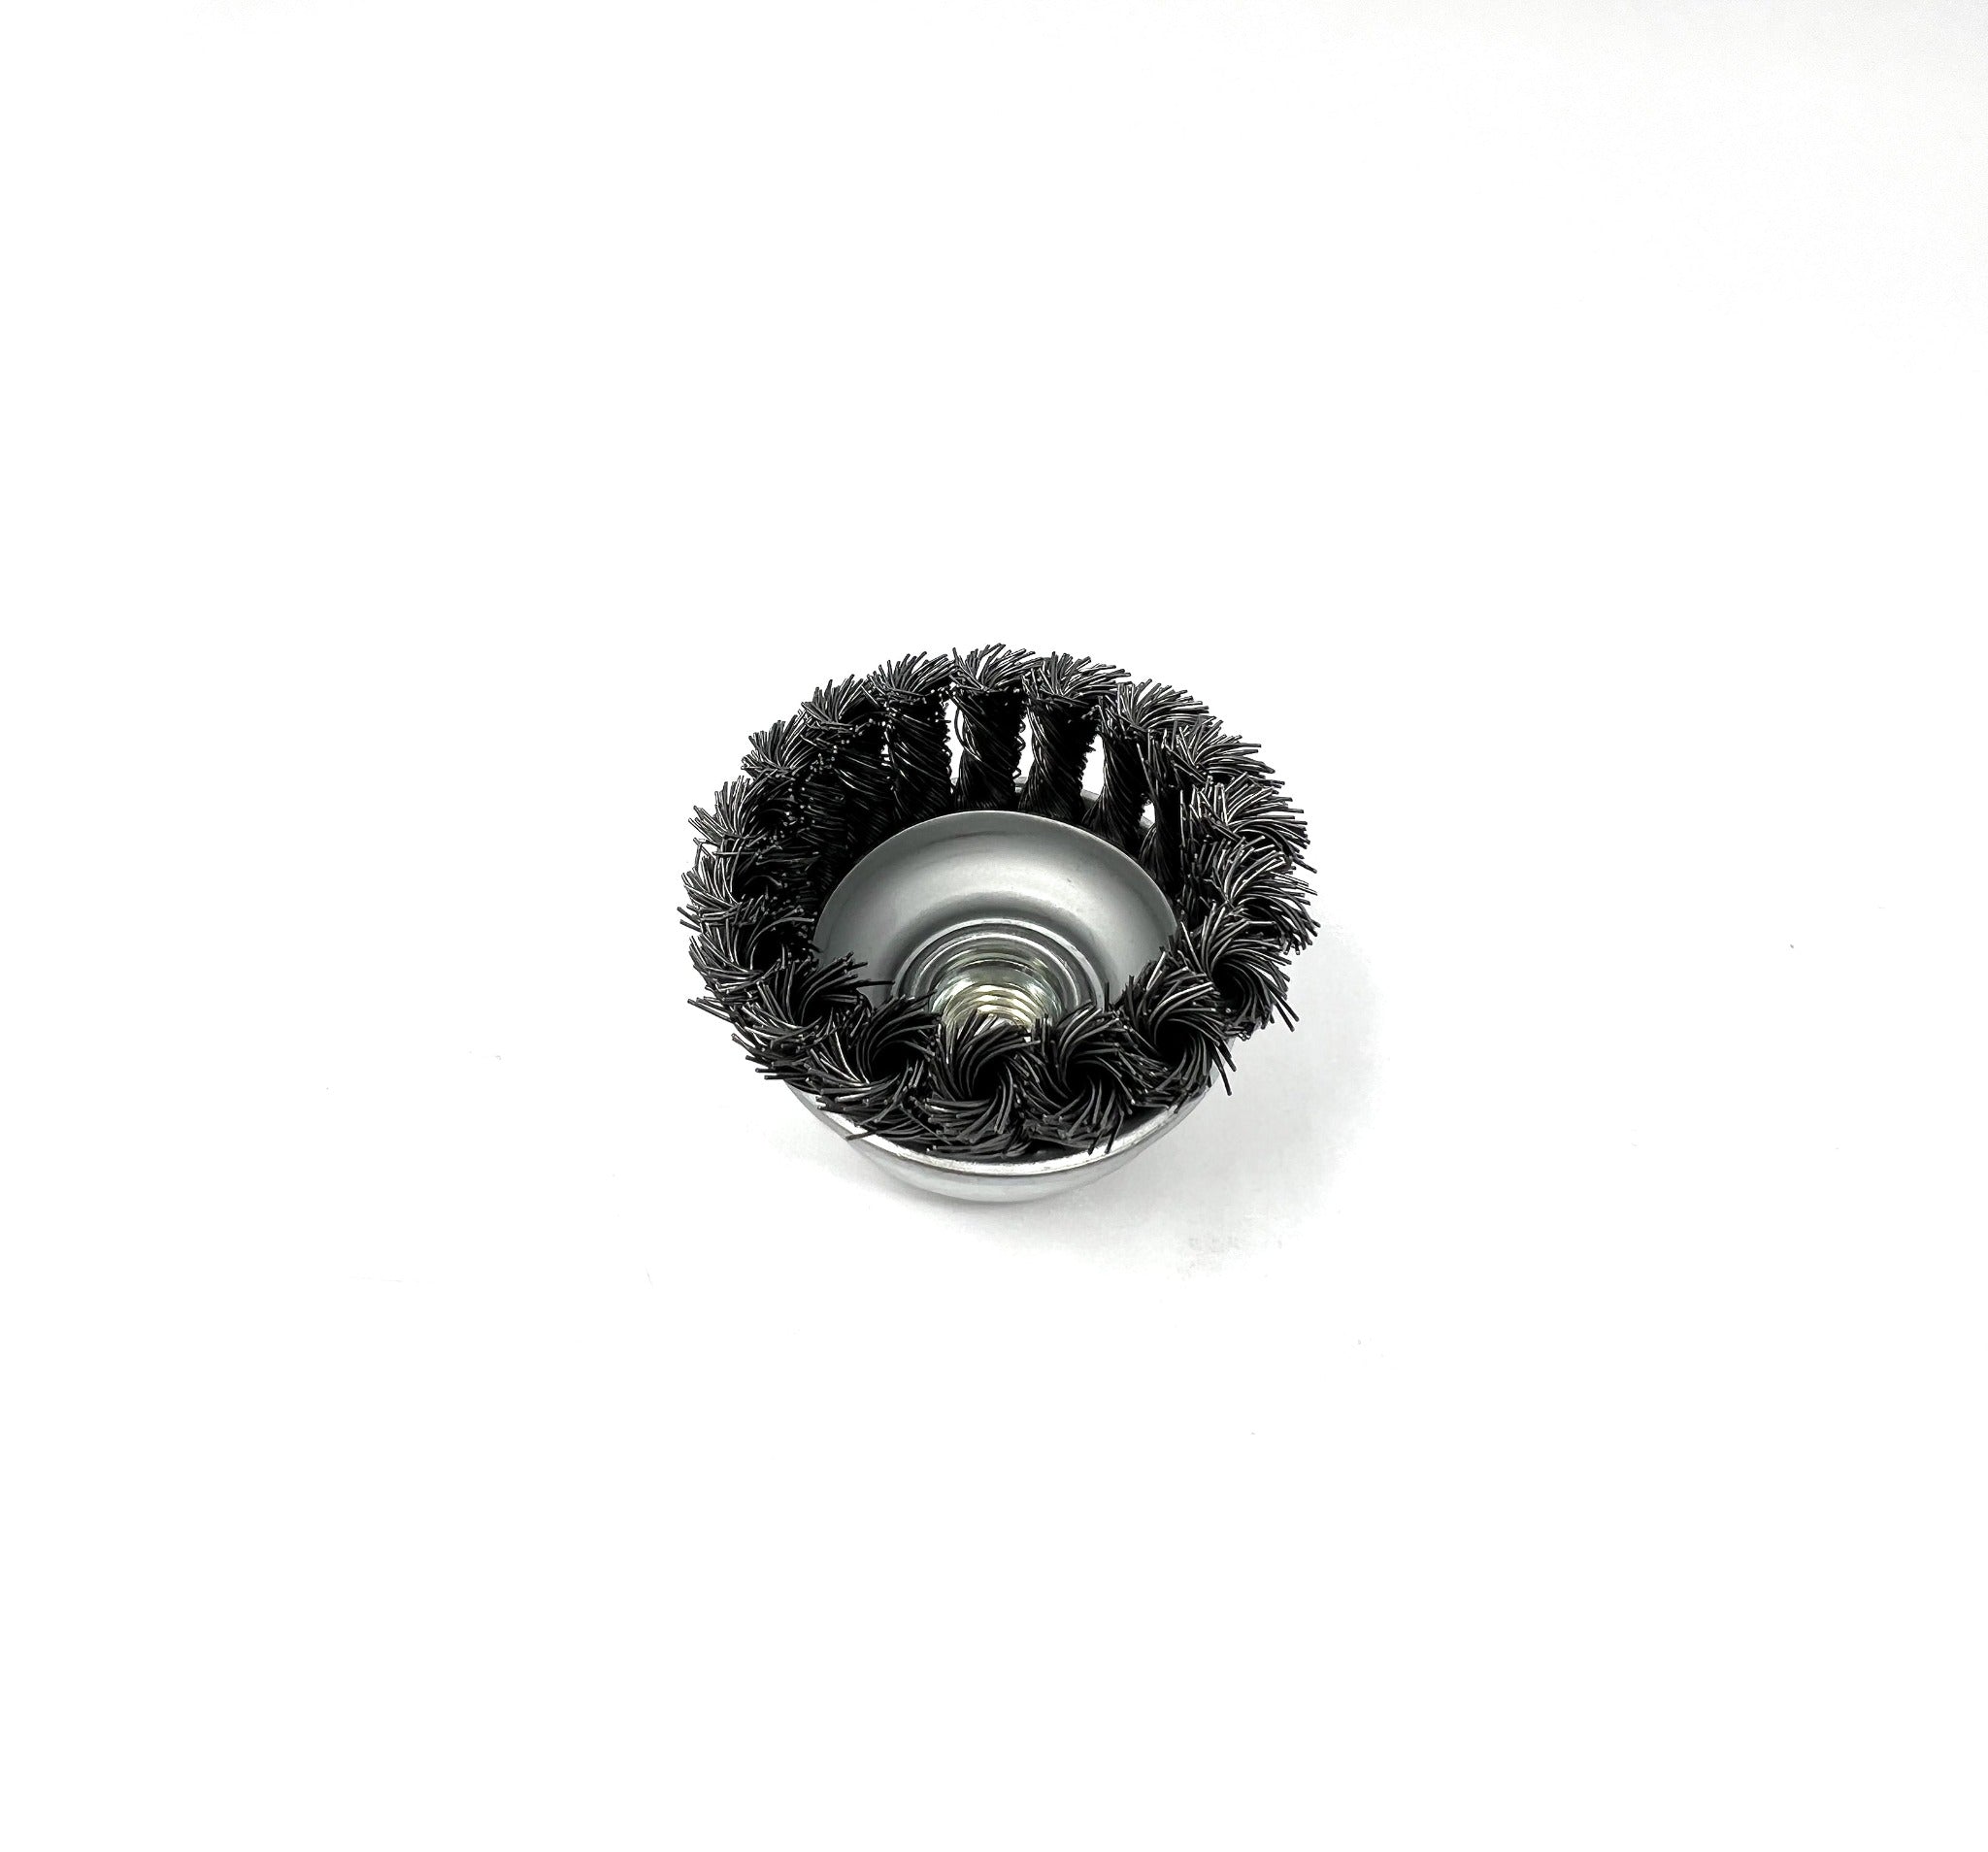 3in. Knot Wire Cup Brush Extra Corse